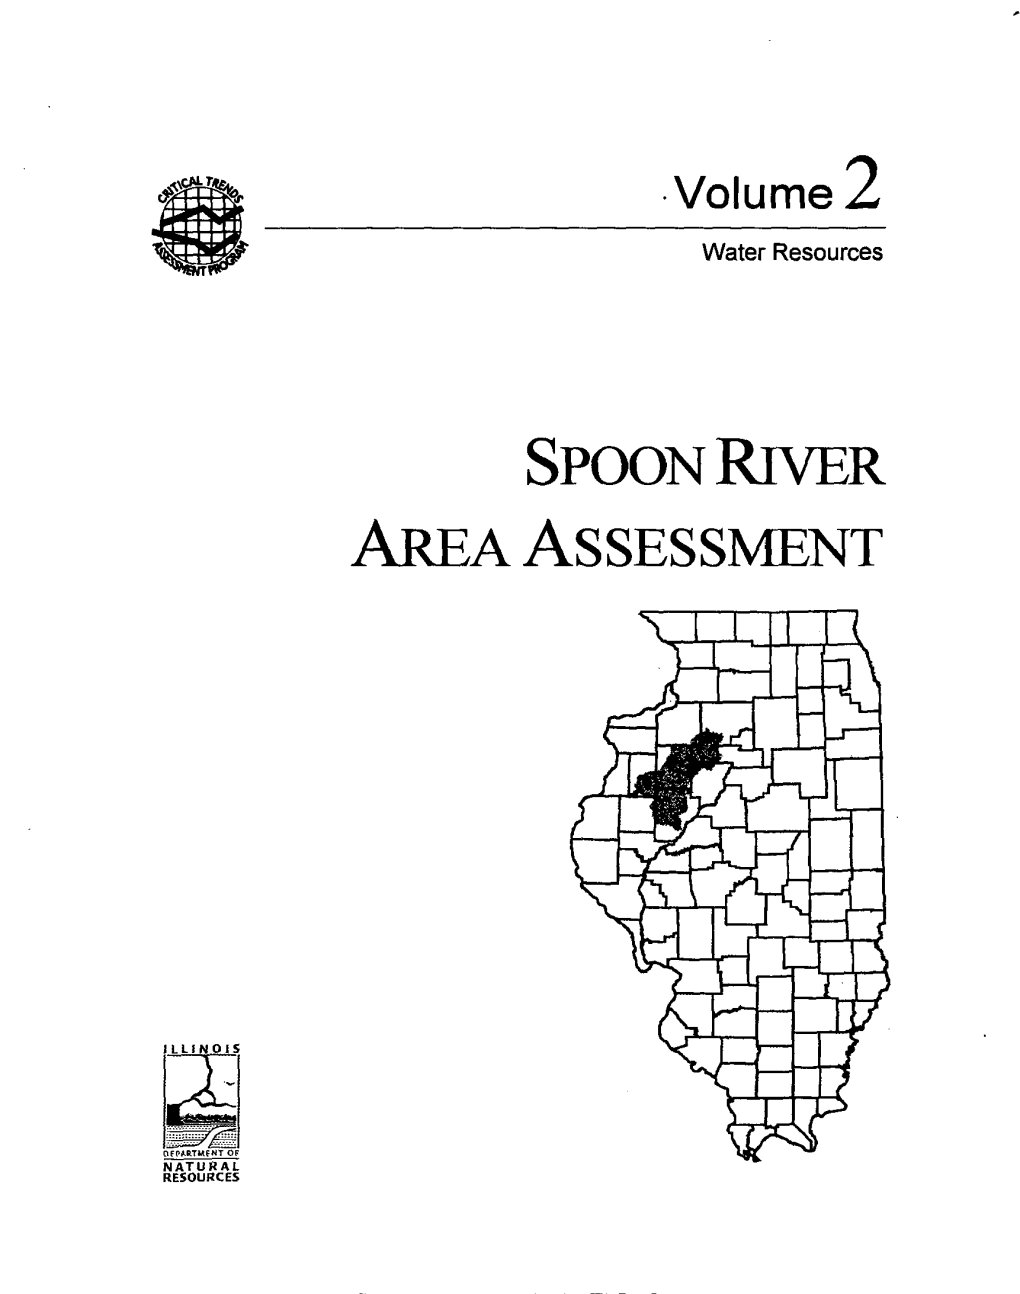 SPOON River AREA ASSESSMENT